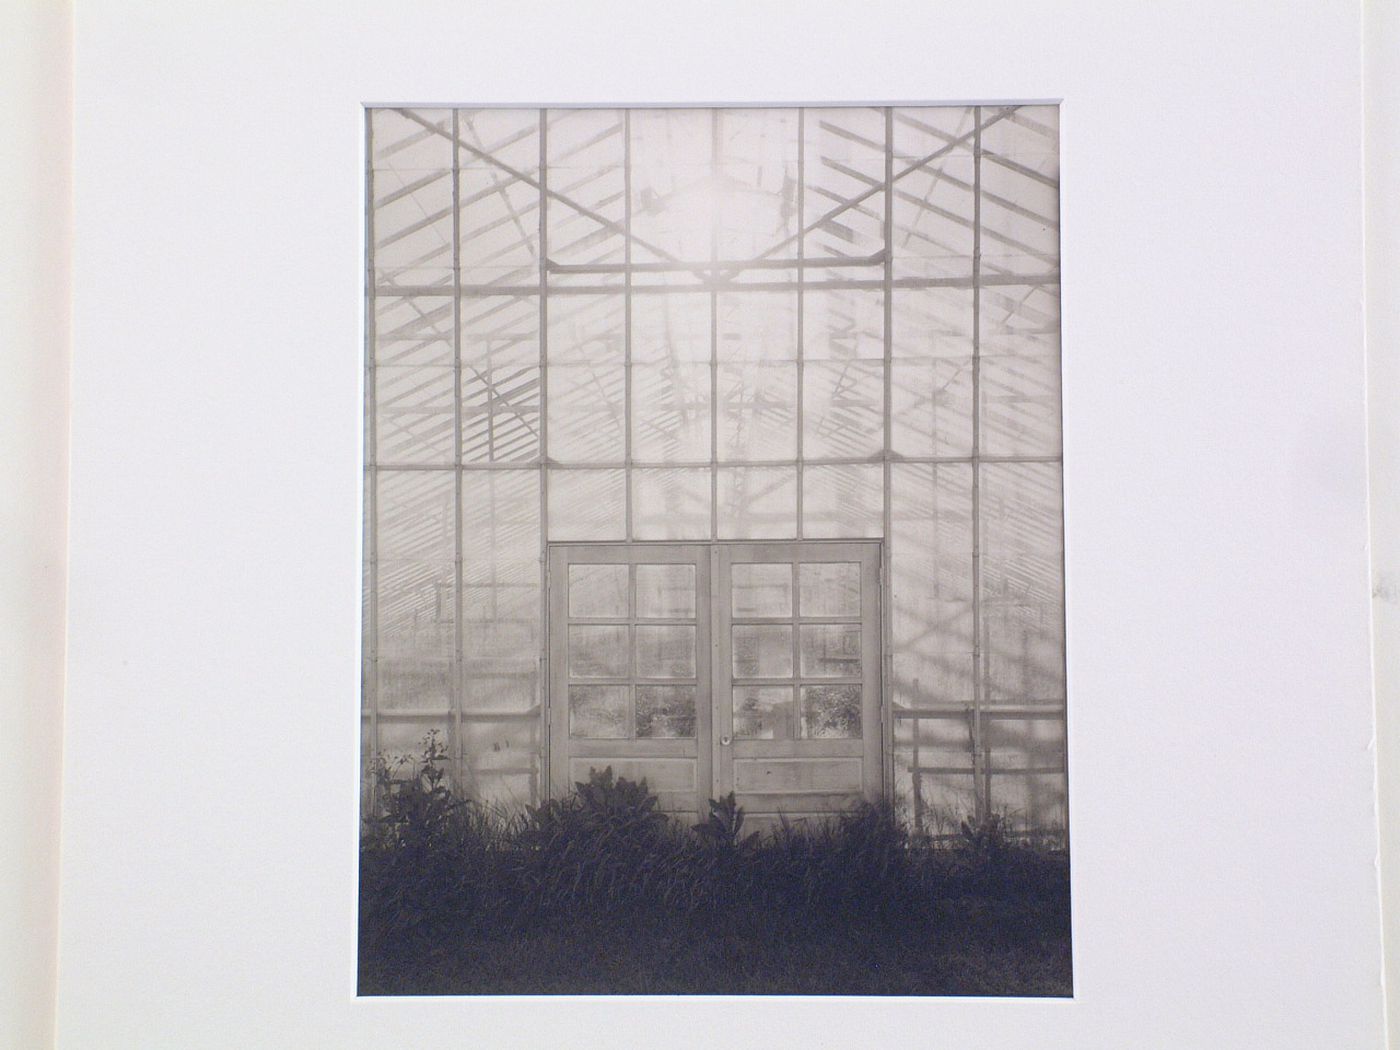 Exterior view of wall and entrance doors of large greenhouse, series 1980